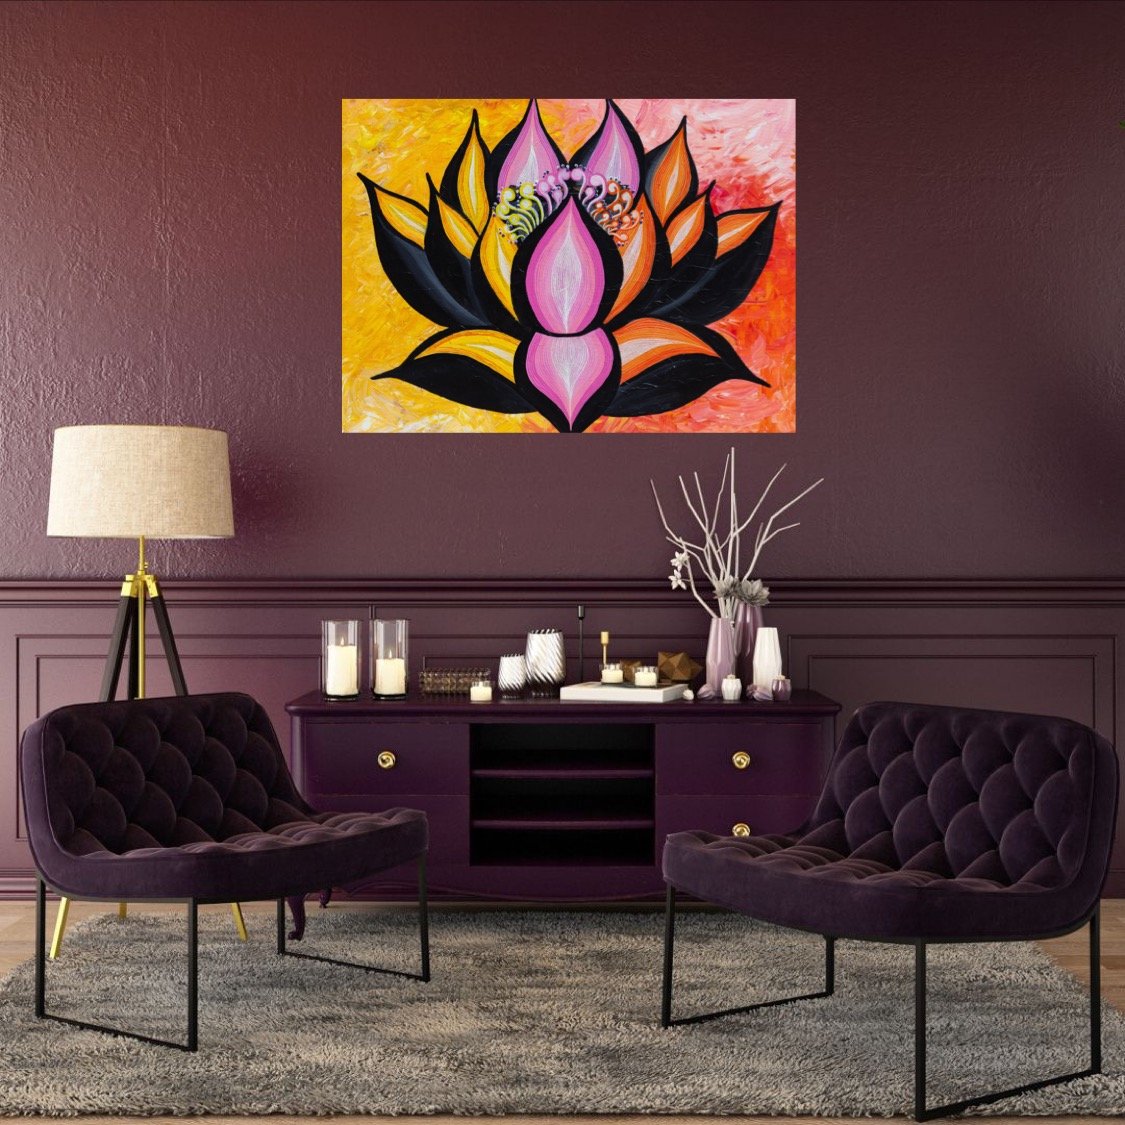 Image of Lotus on fire 